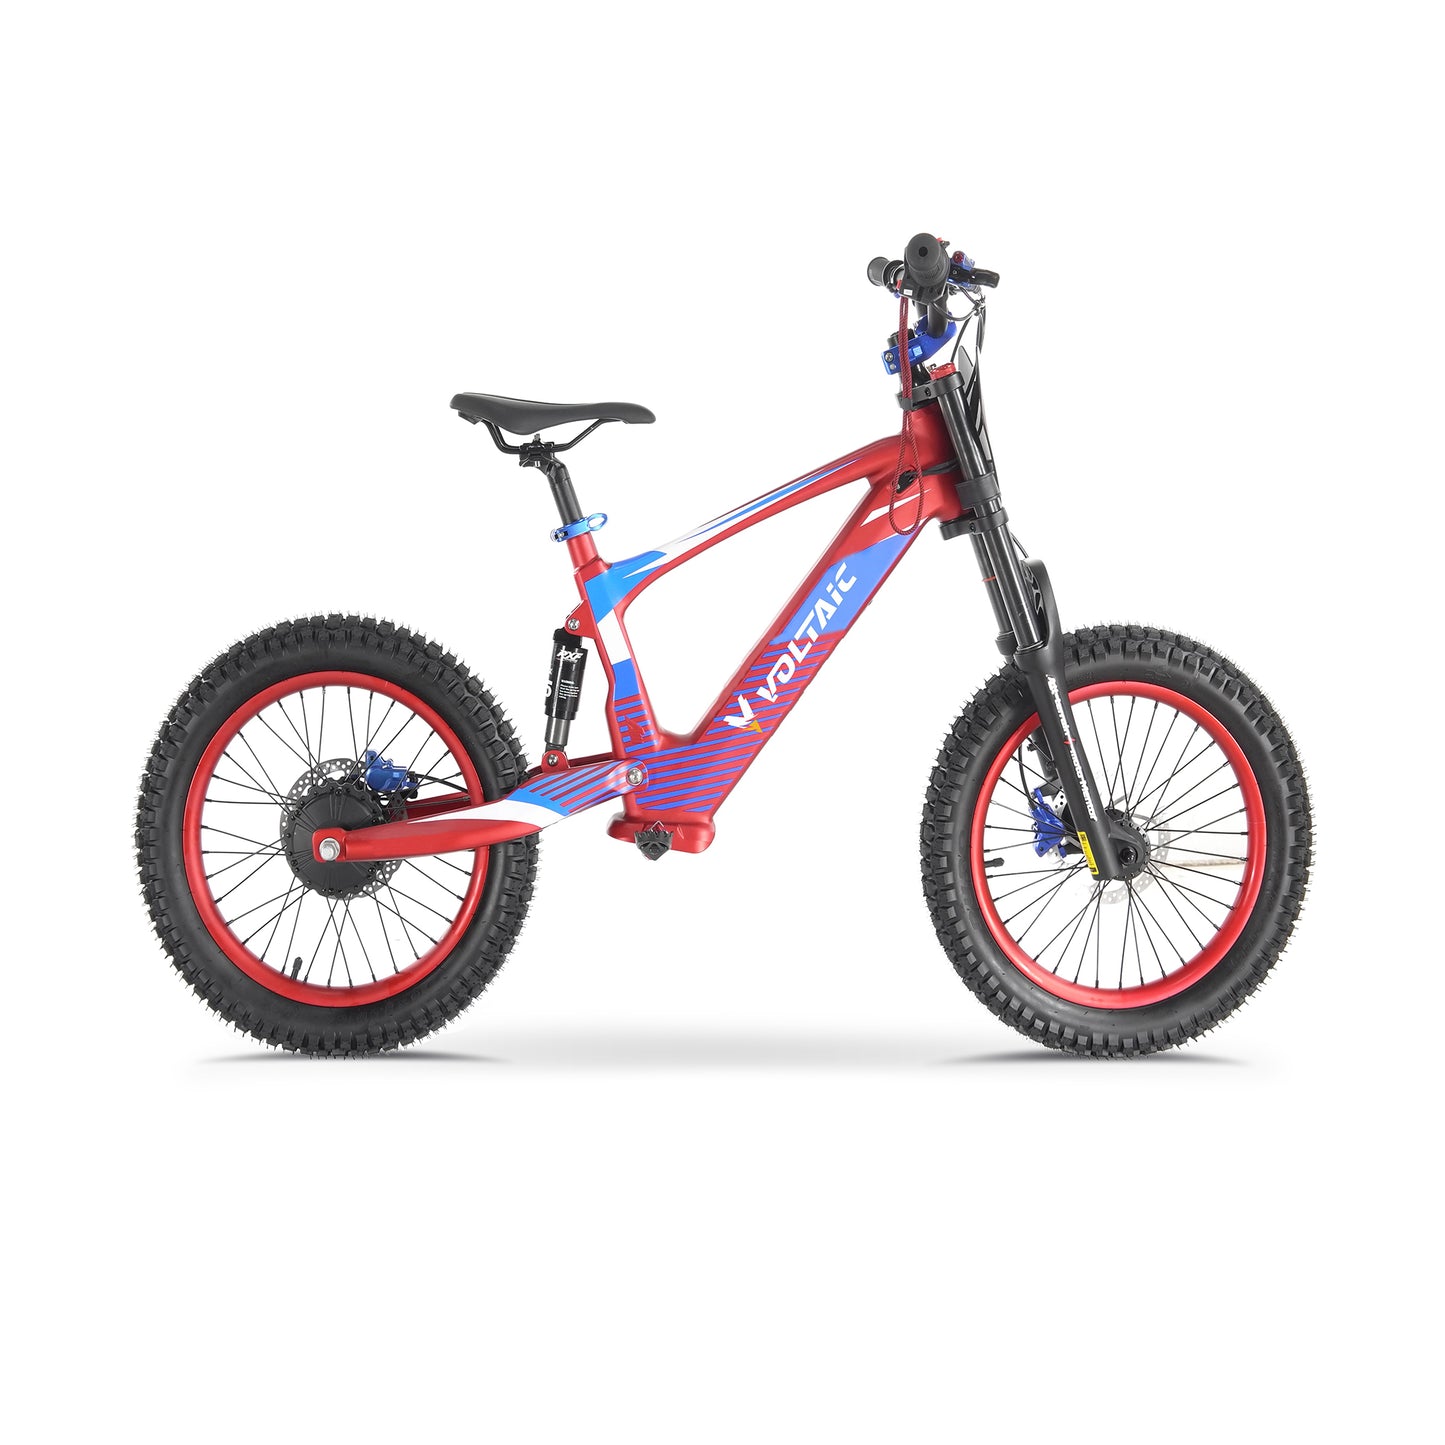 VOLTAIC Flying Fox Youth 750w Electric Dirt Bike w/60 minutes Max Range & 19mp/h Max Speed - Red